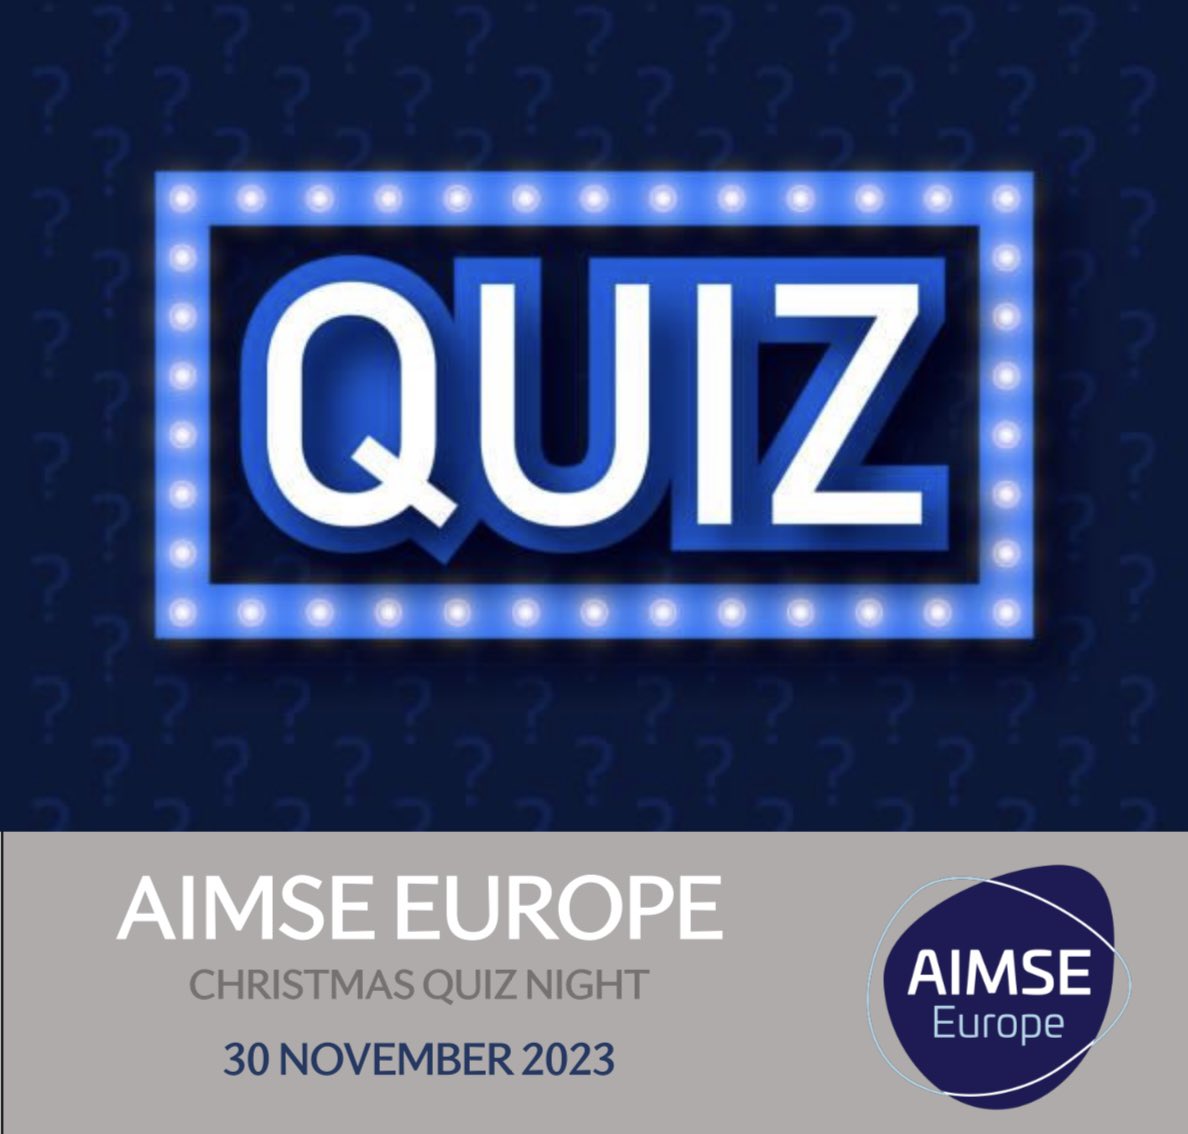 Further details will soon be revealed for our Christmas Quiz Night which will take place at the end of this year! Registration is now open, don’t miss out as places are going fast! 👇🏼 members.aimseeurope.com/iCore/Events/E… #aimseeuropeevents #quiznight #christmasparty #events #finance